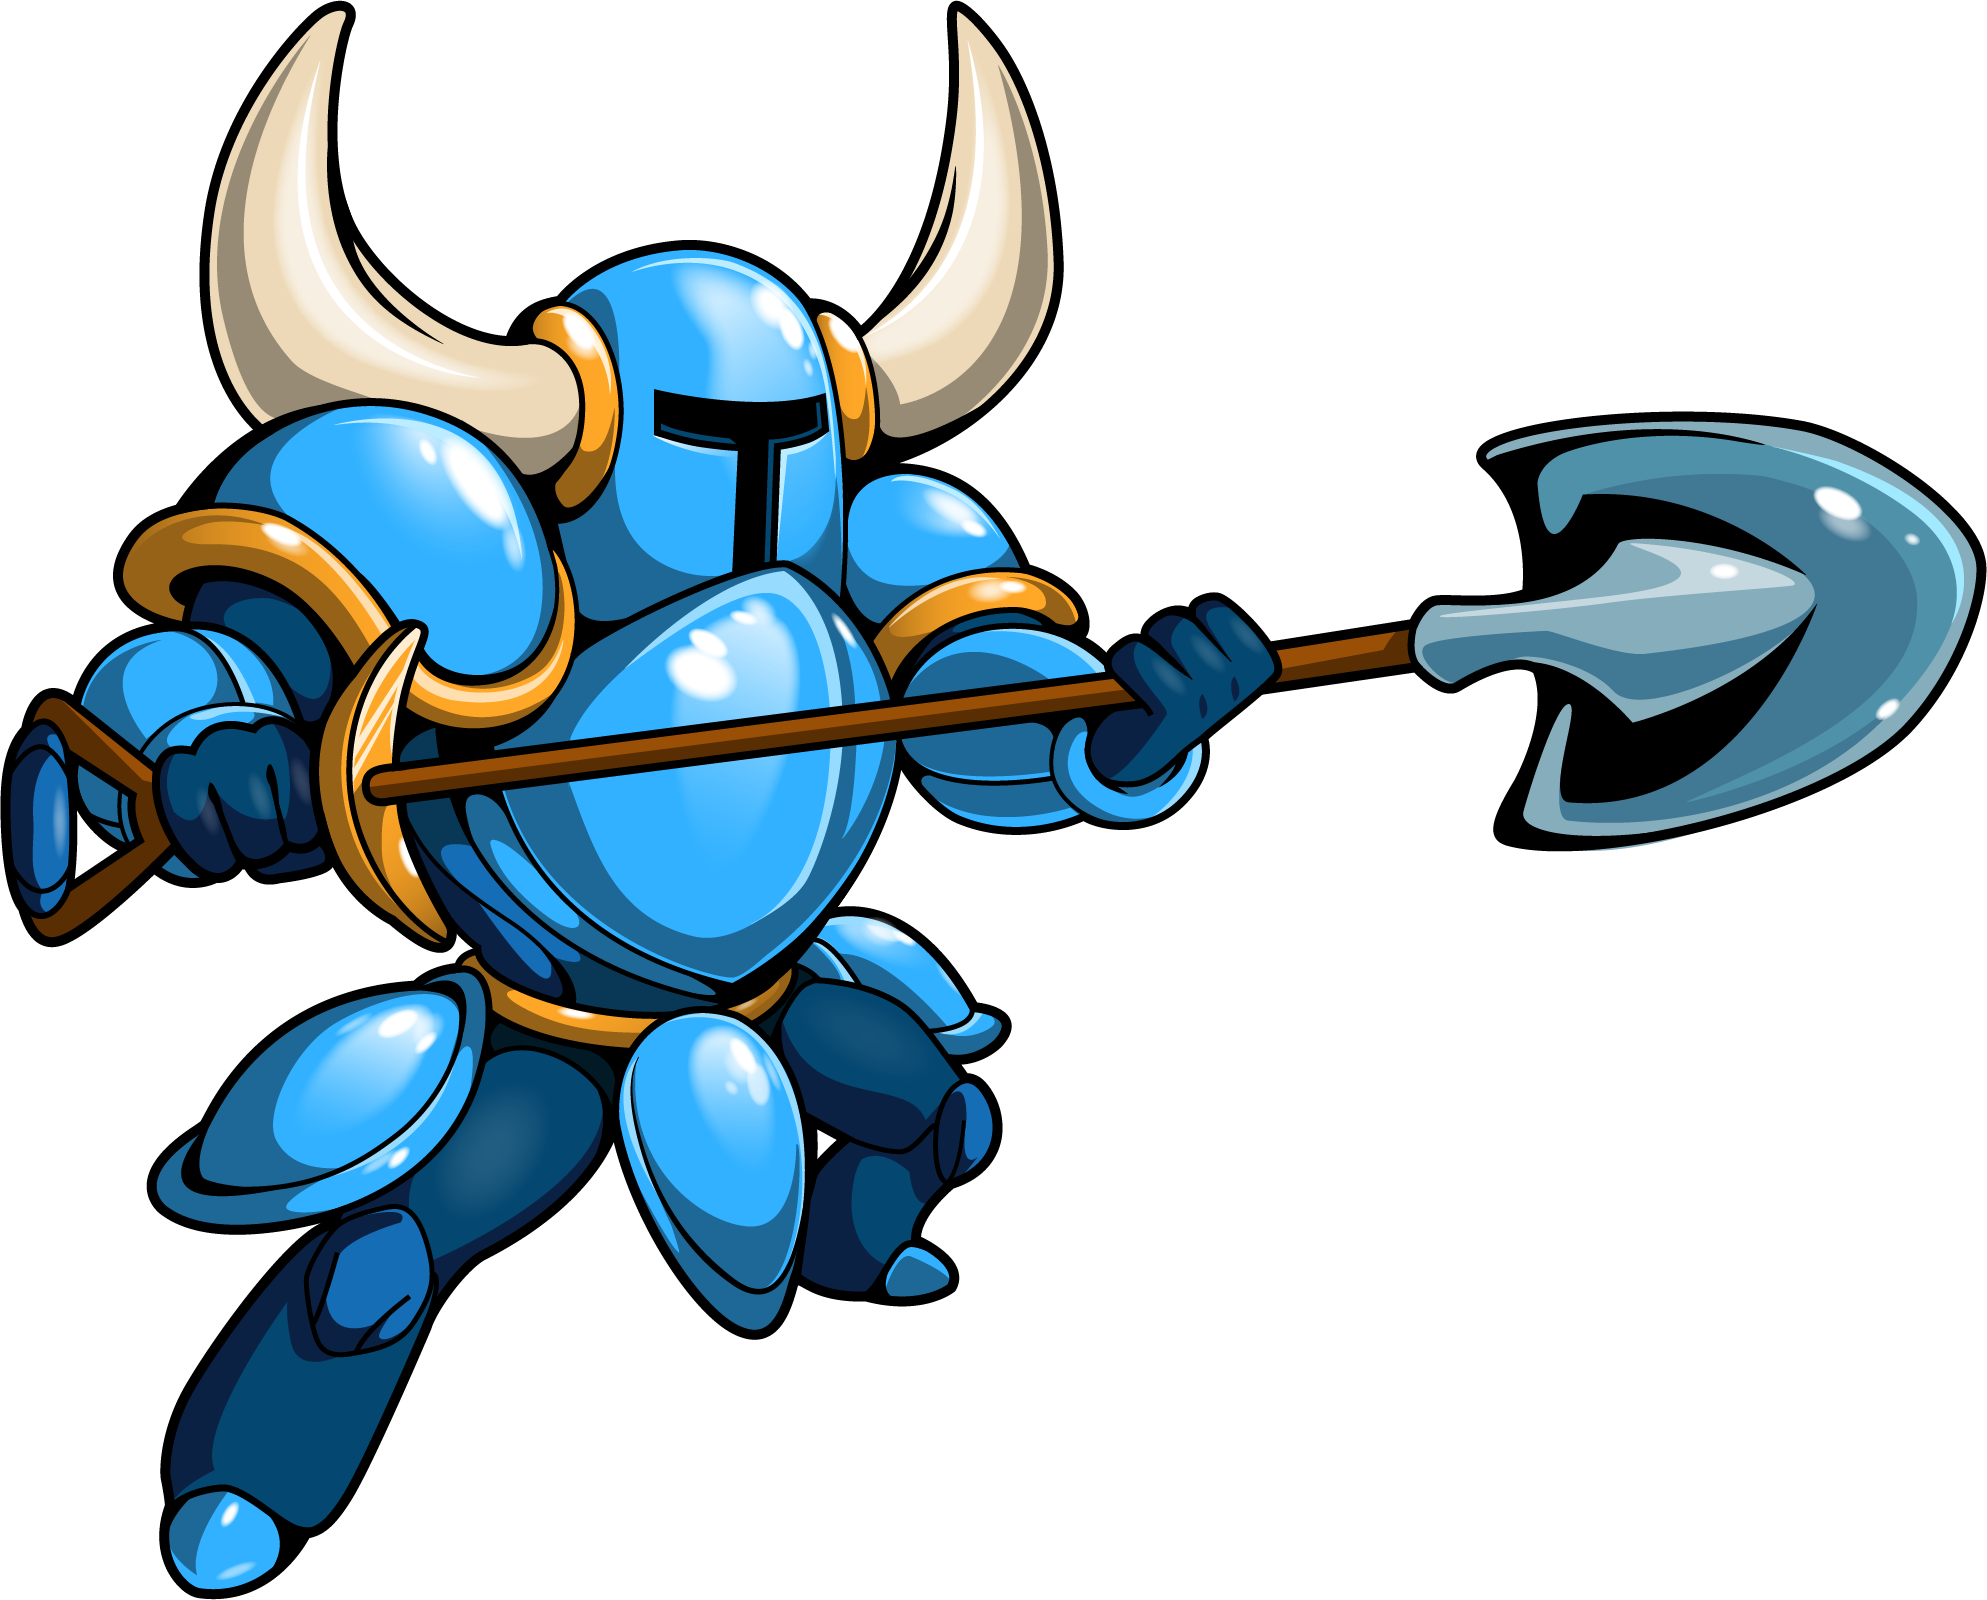 A Cartoon Of A Blue Knight Holding A Spear